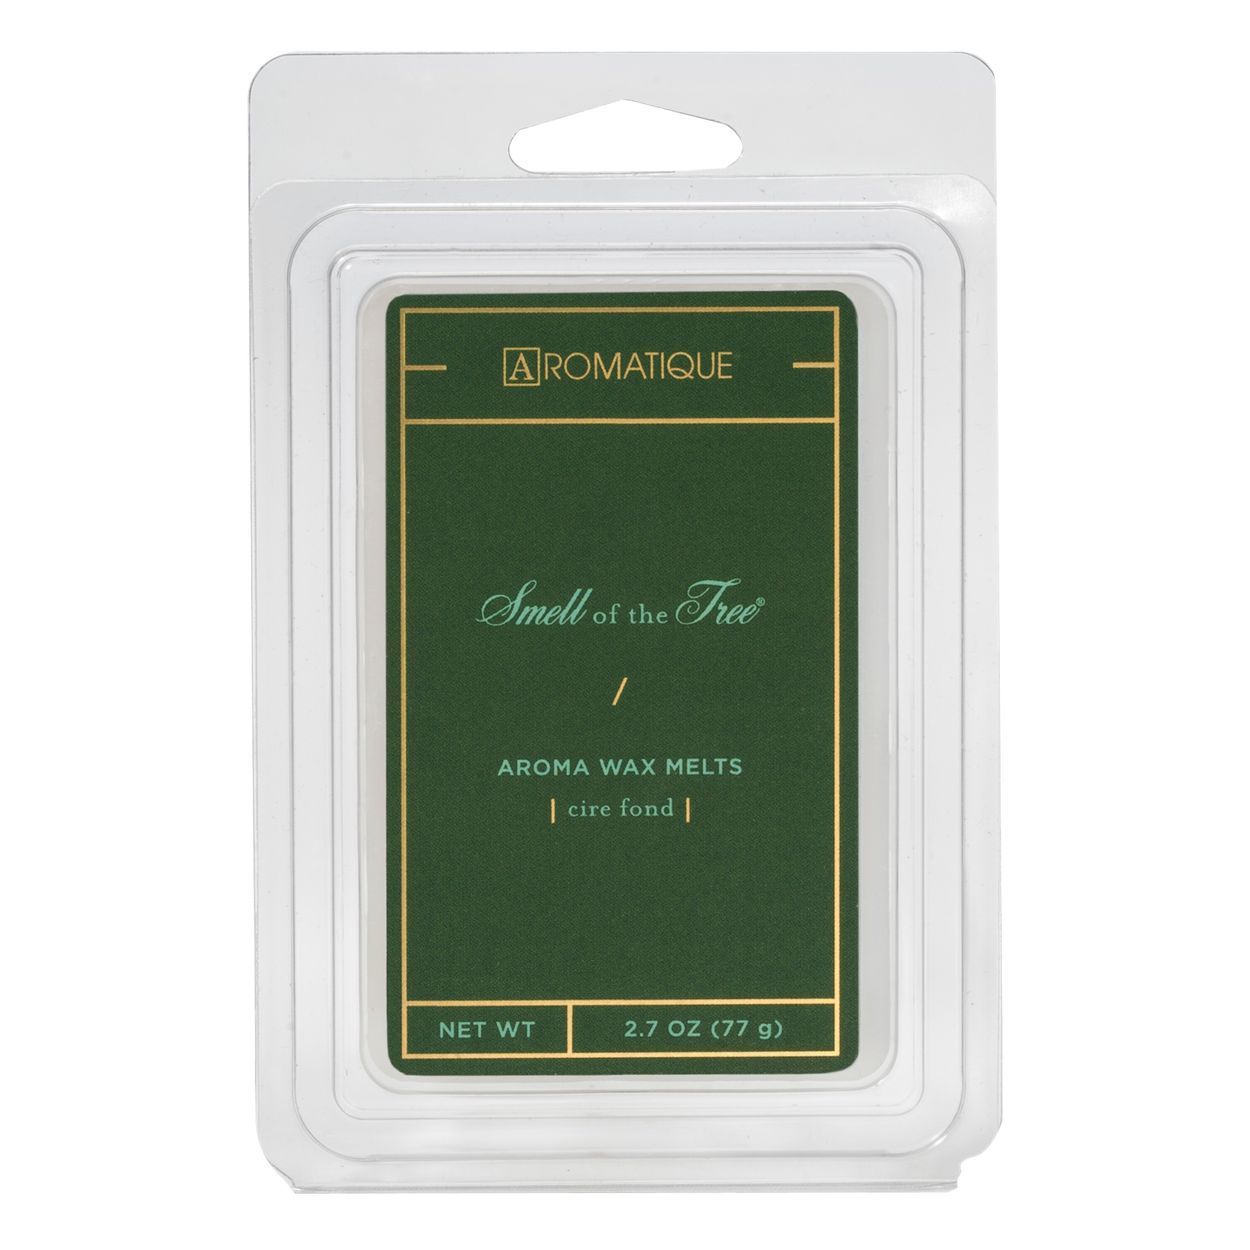 SMELL OF THE TREE - CASE OF 12 WAX MELTS by Aromatique